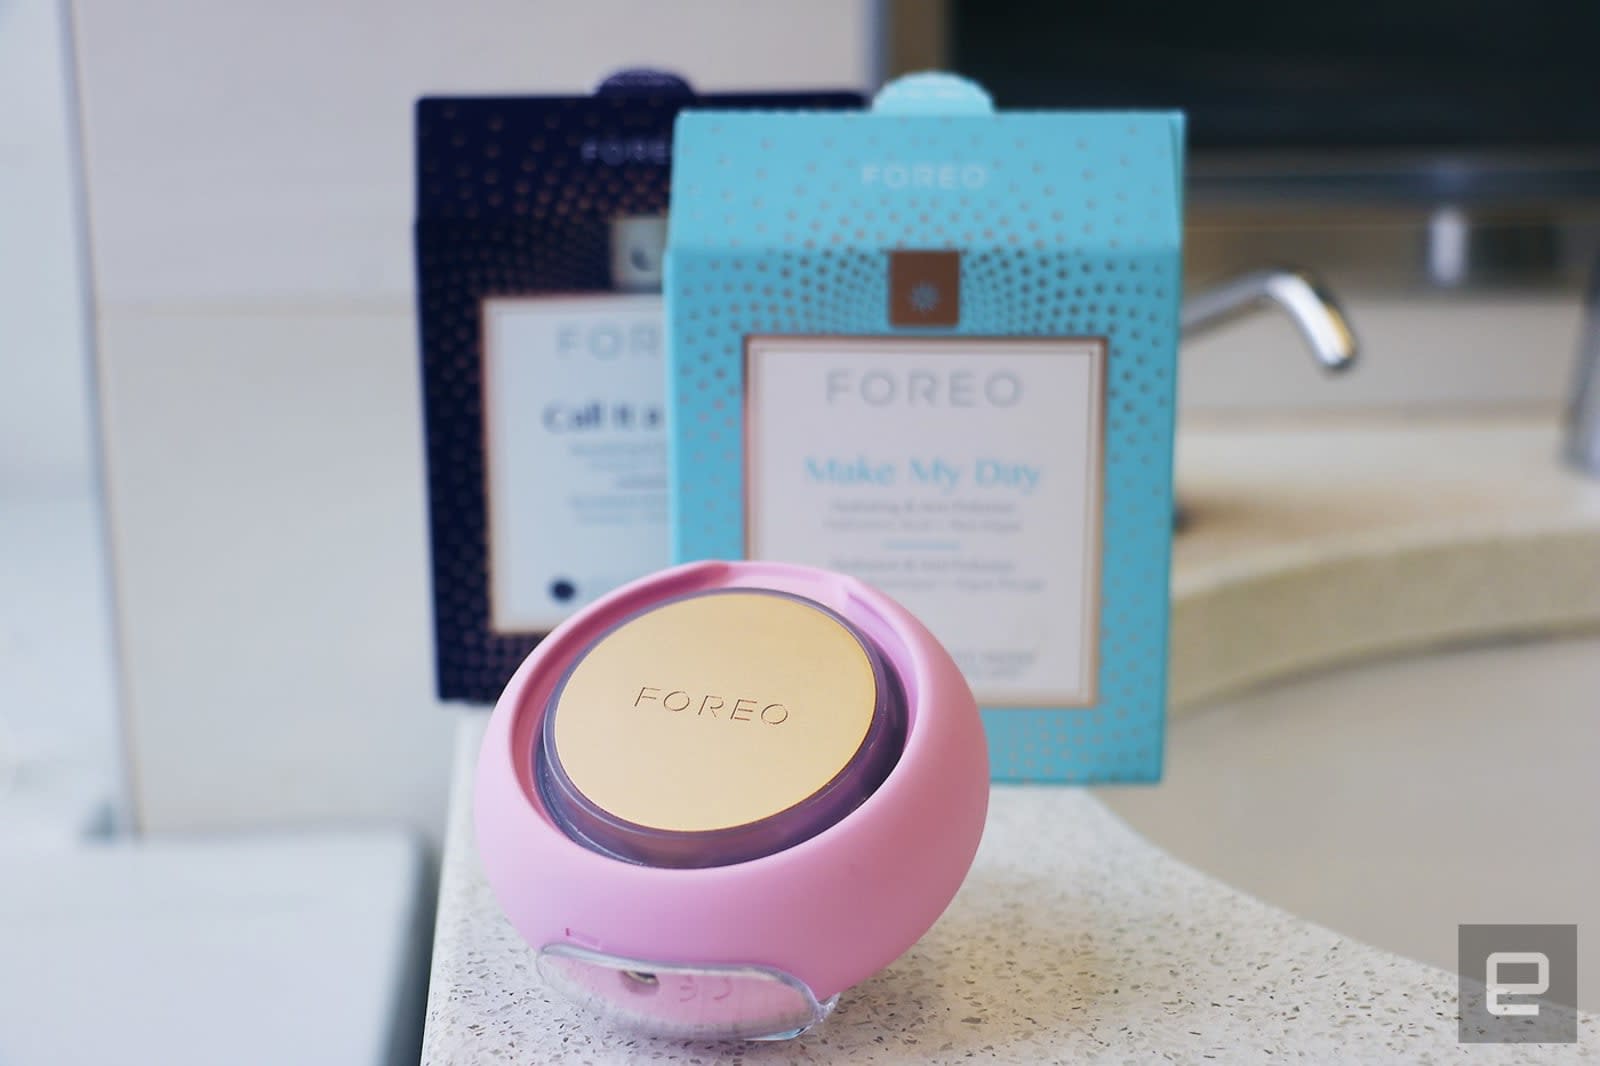 No one needs this $279 vibrating face puck | Engadget